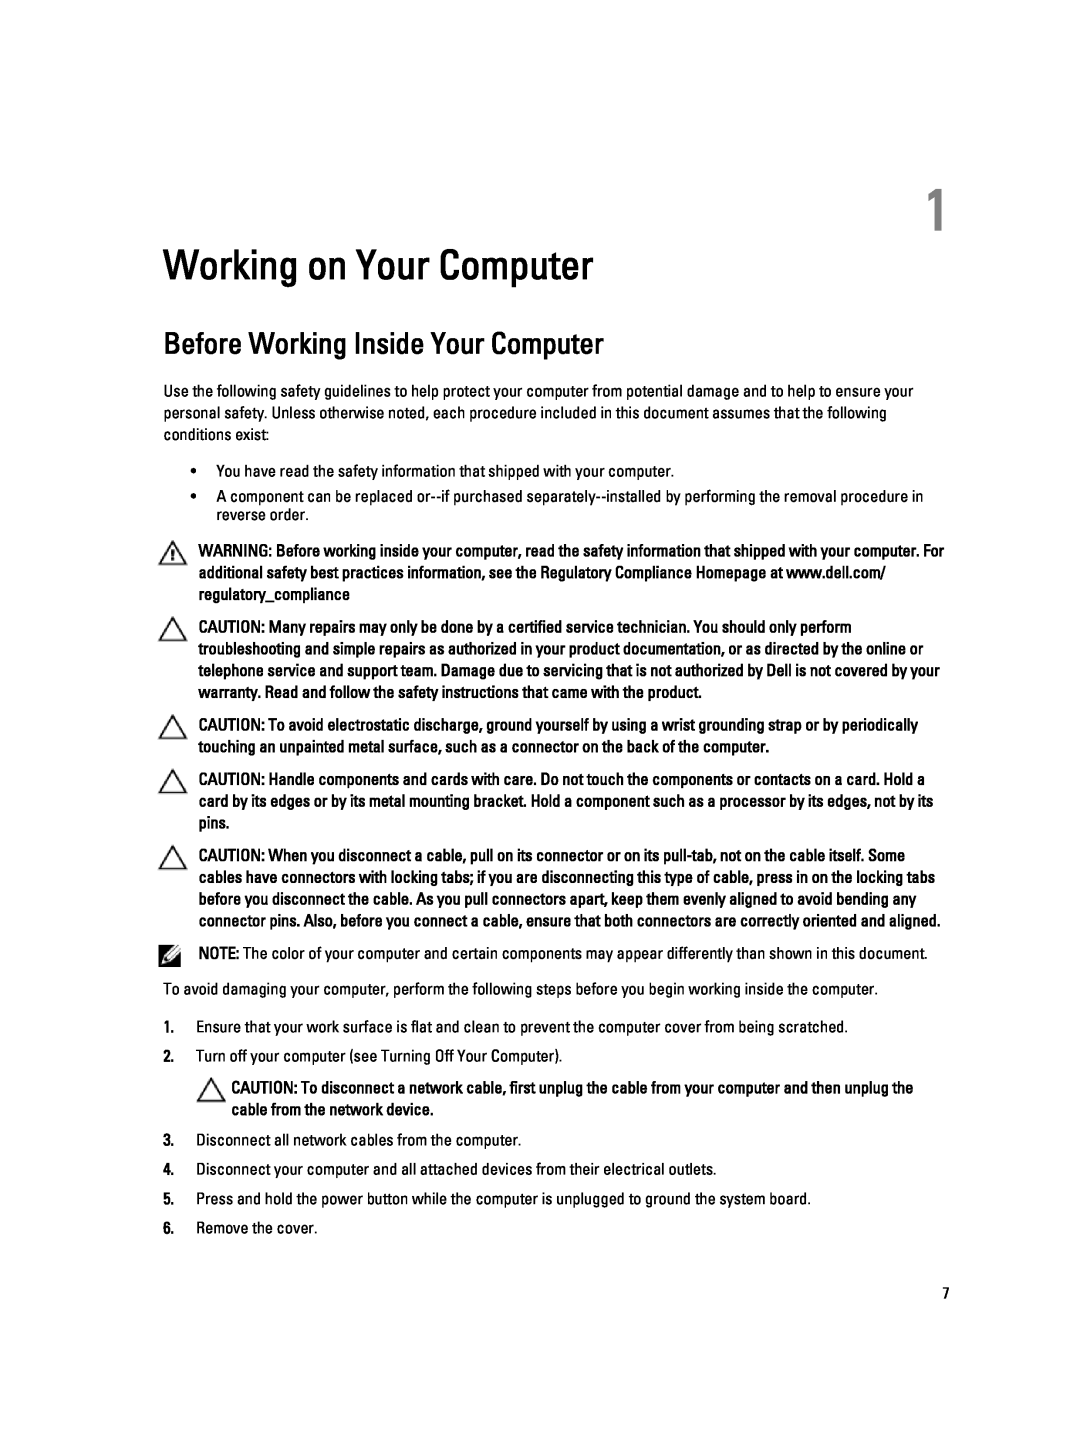 Dell 9010, W04C owner manual Working on Your Computer, Before Working Inside Your Computer 